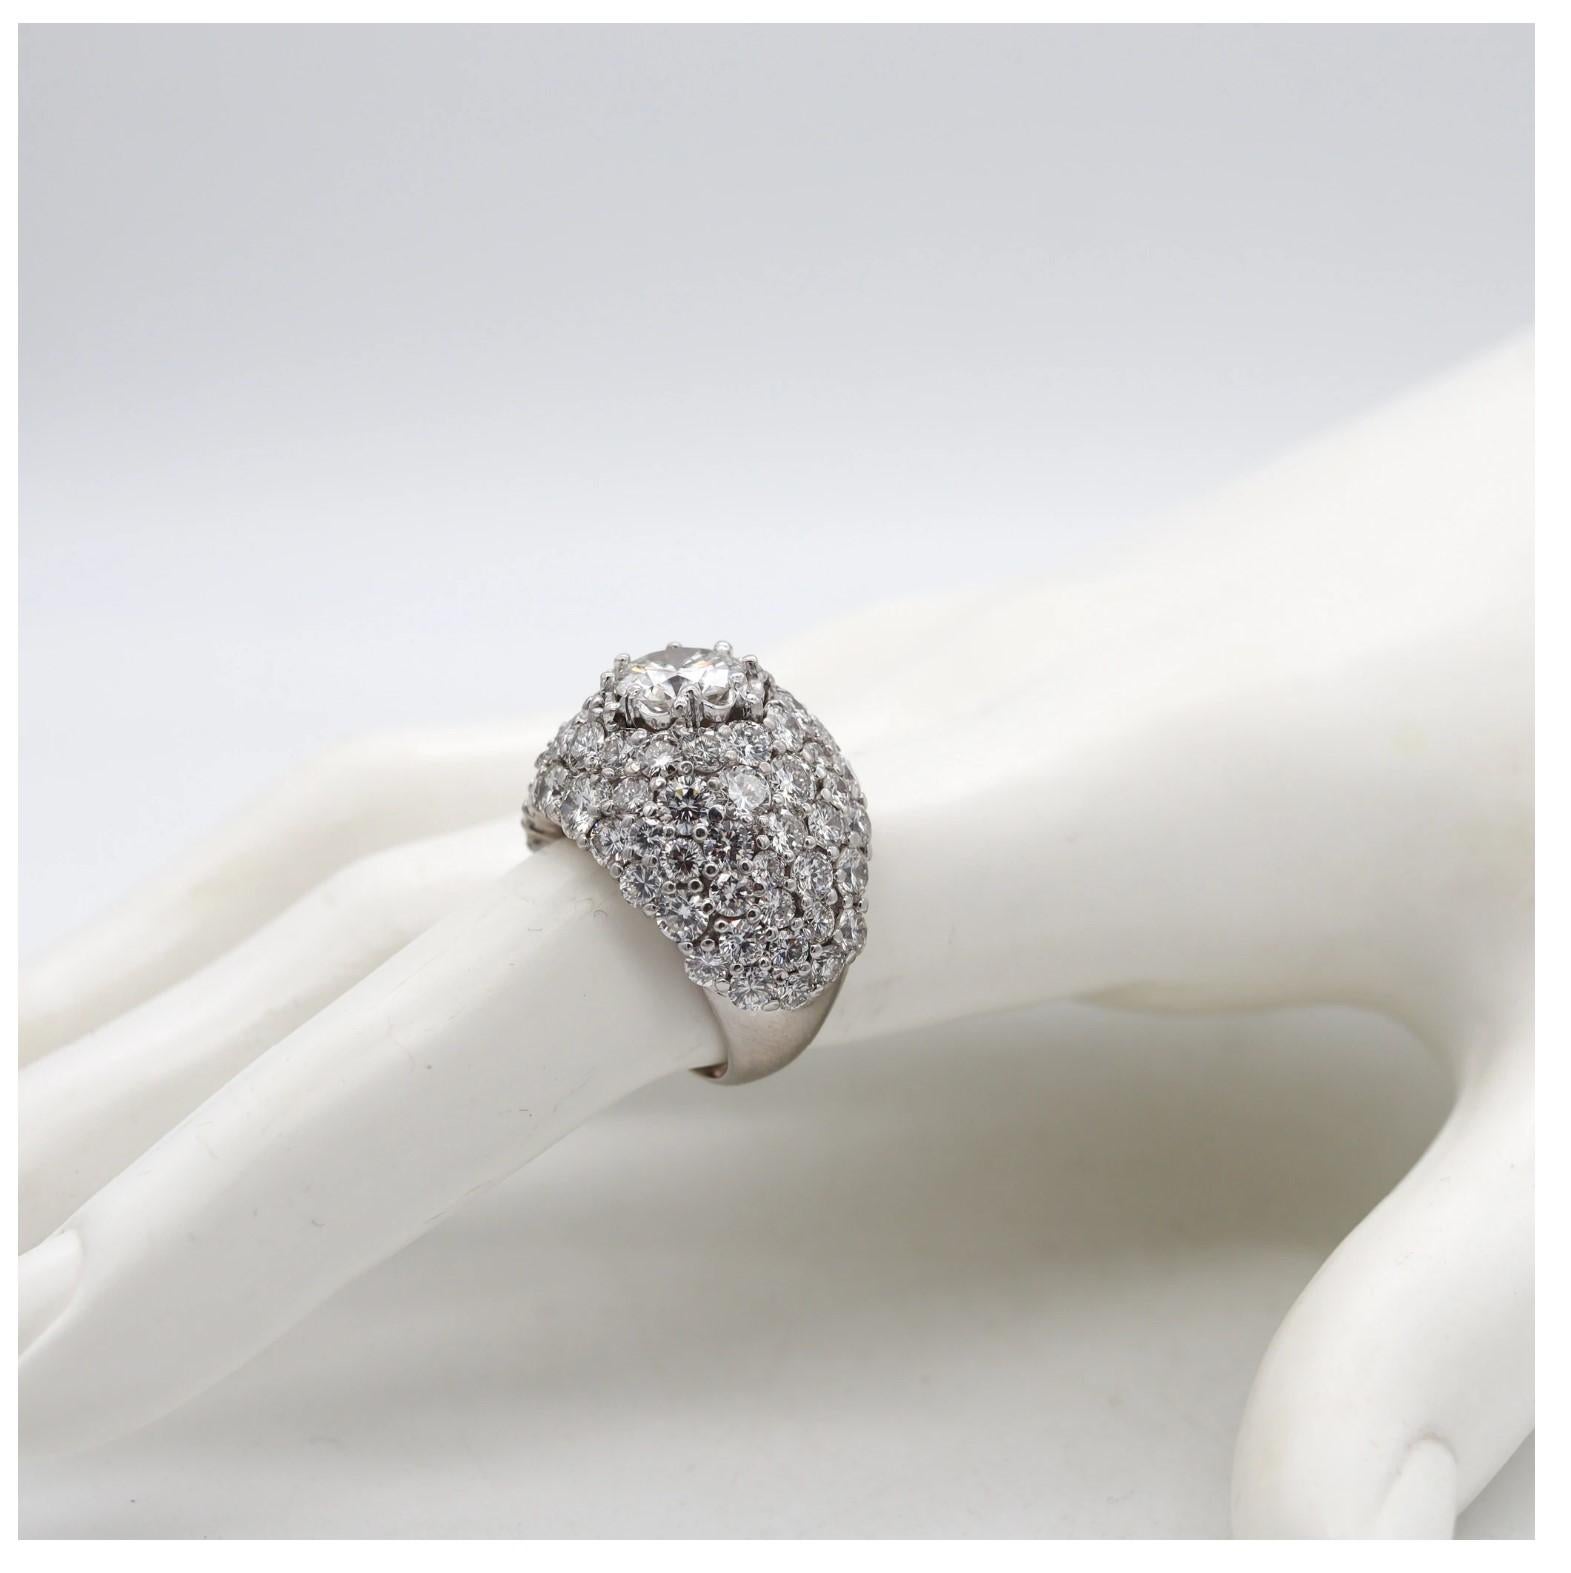 Yanes Exceptional Platinum Cluster Cocktail Ring Gia Certified 10.16 Ctw Diamond For Sale 1